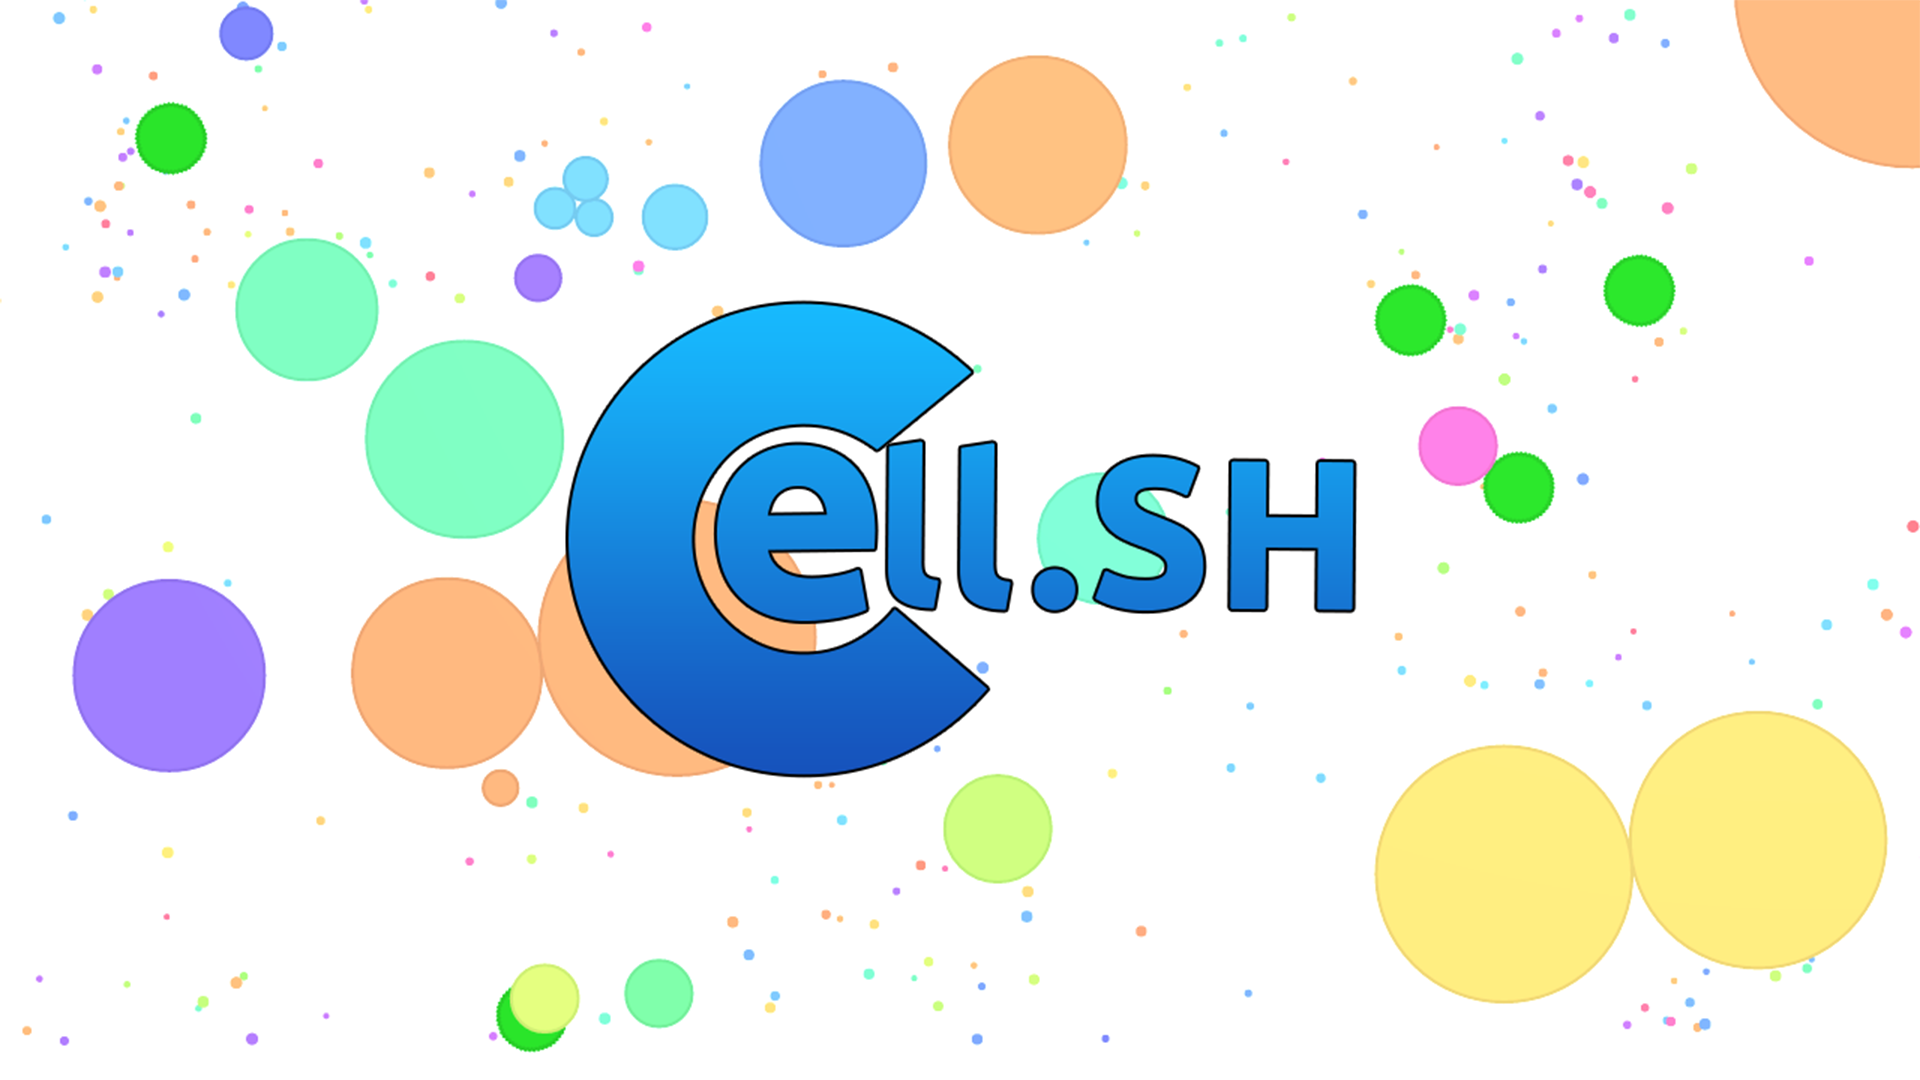 cell.sh